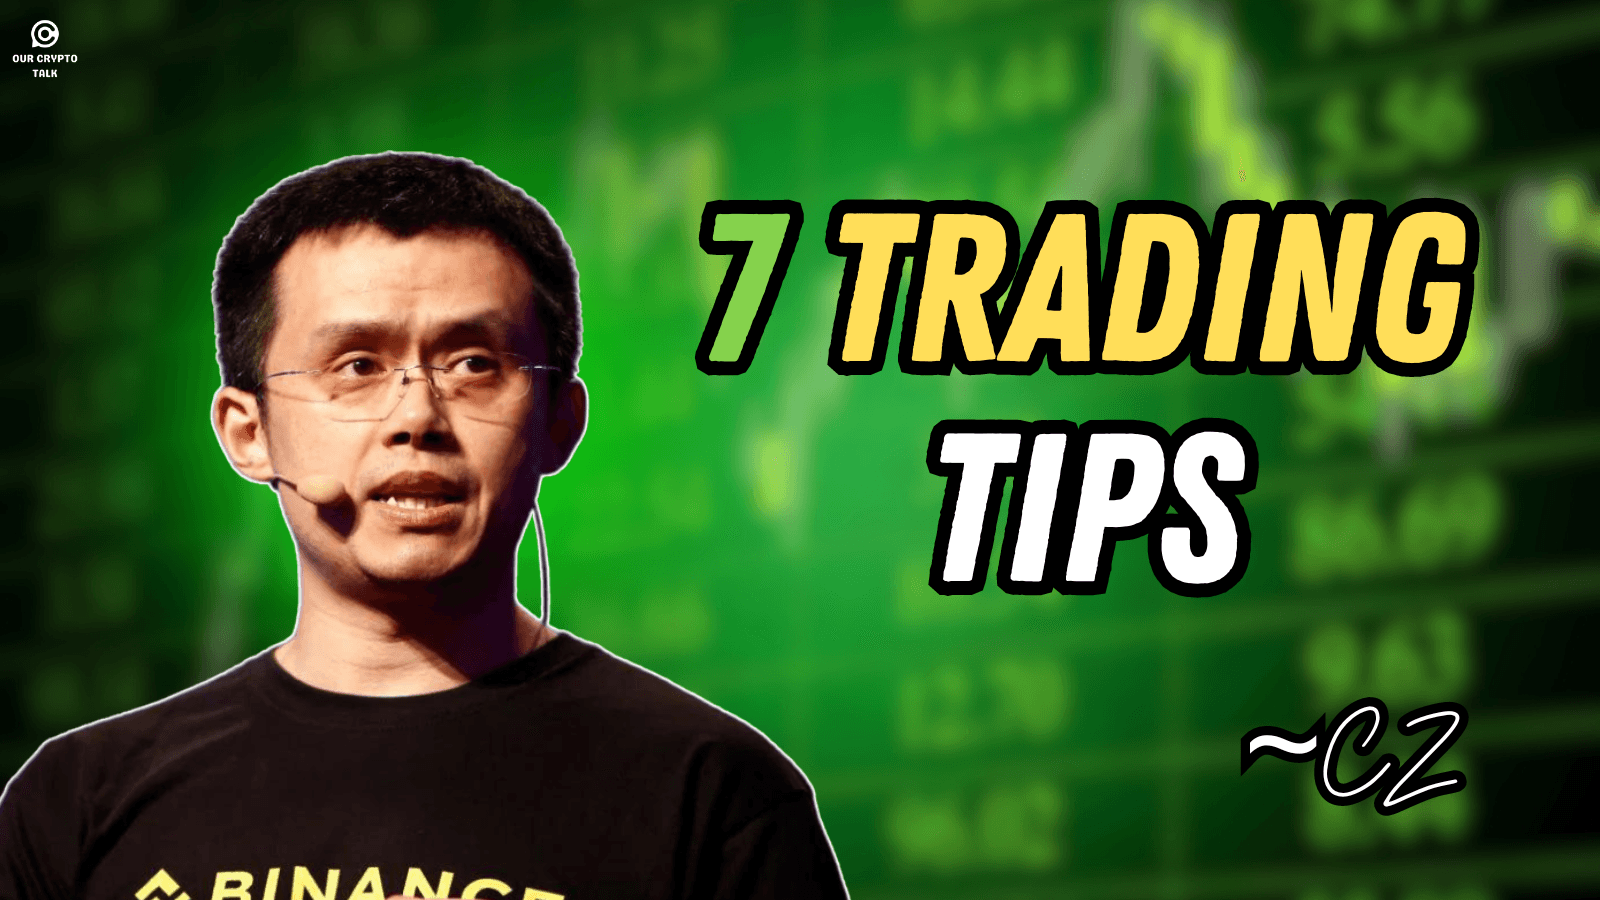 7 trading tips by CZ from Binance image